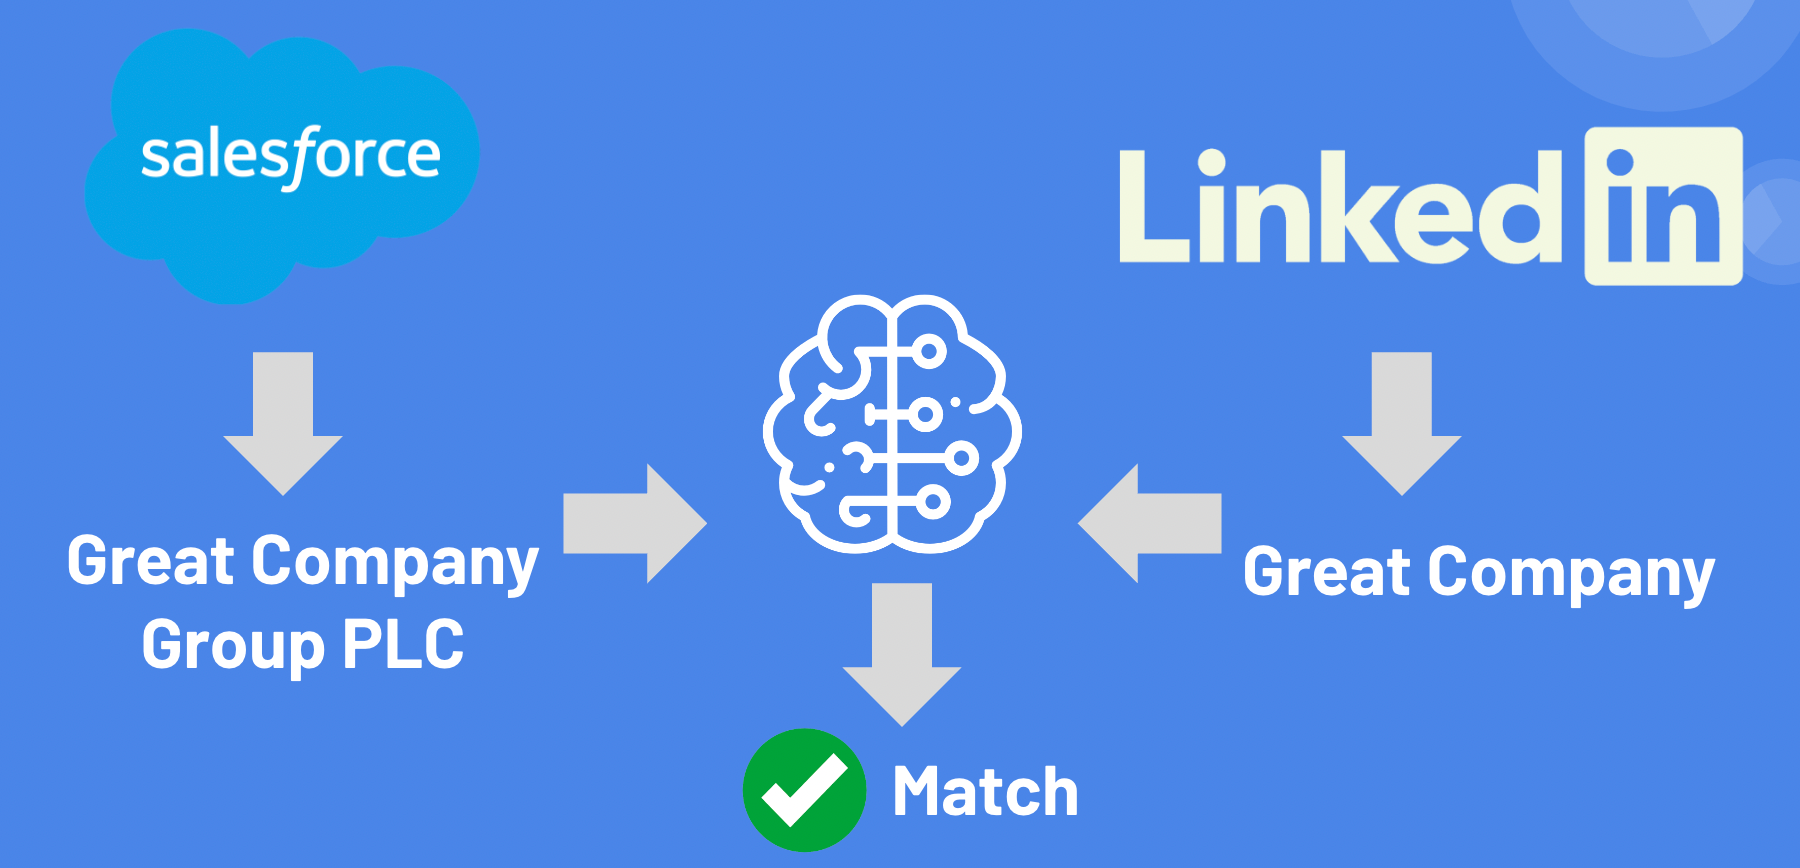 Process for fuzzy matching CRM and Linkedin API business names. 